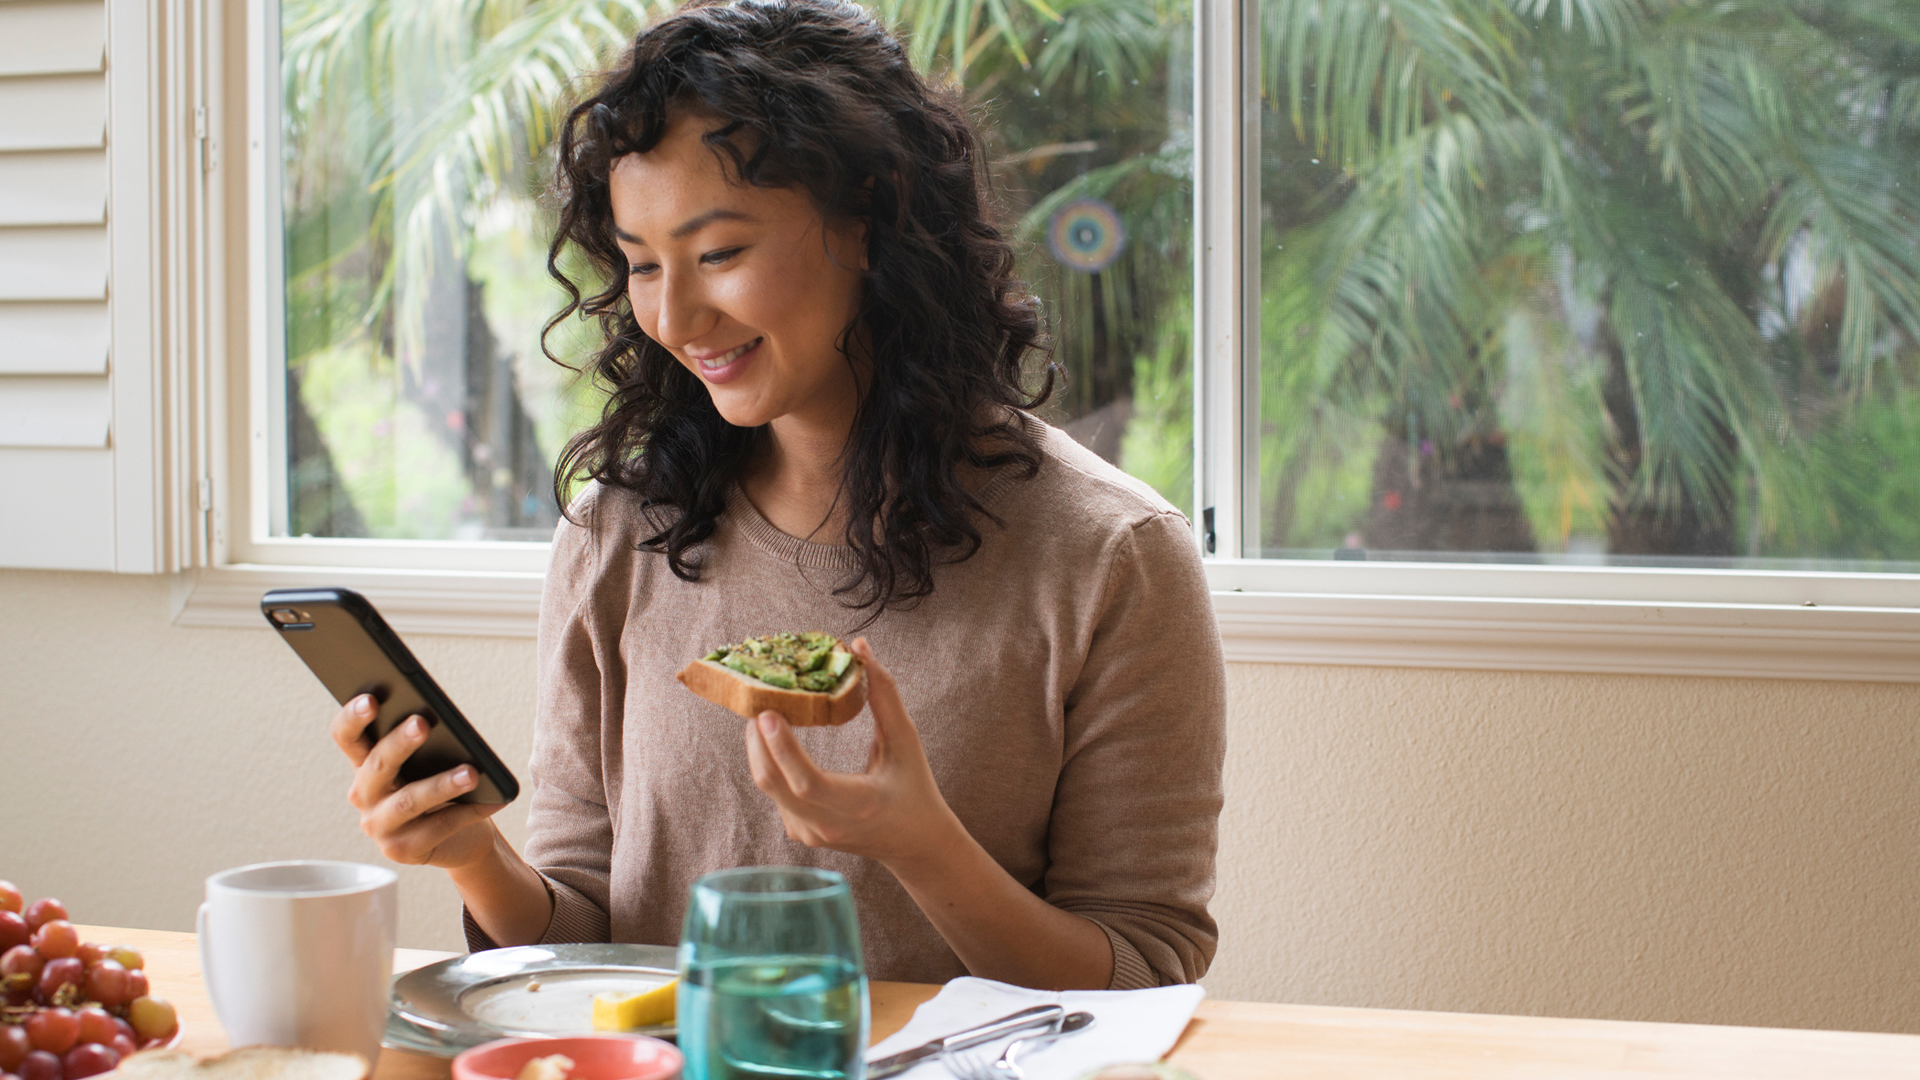 woman eating avocado on toast while looking at her phone